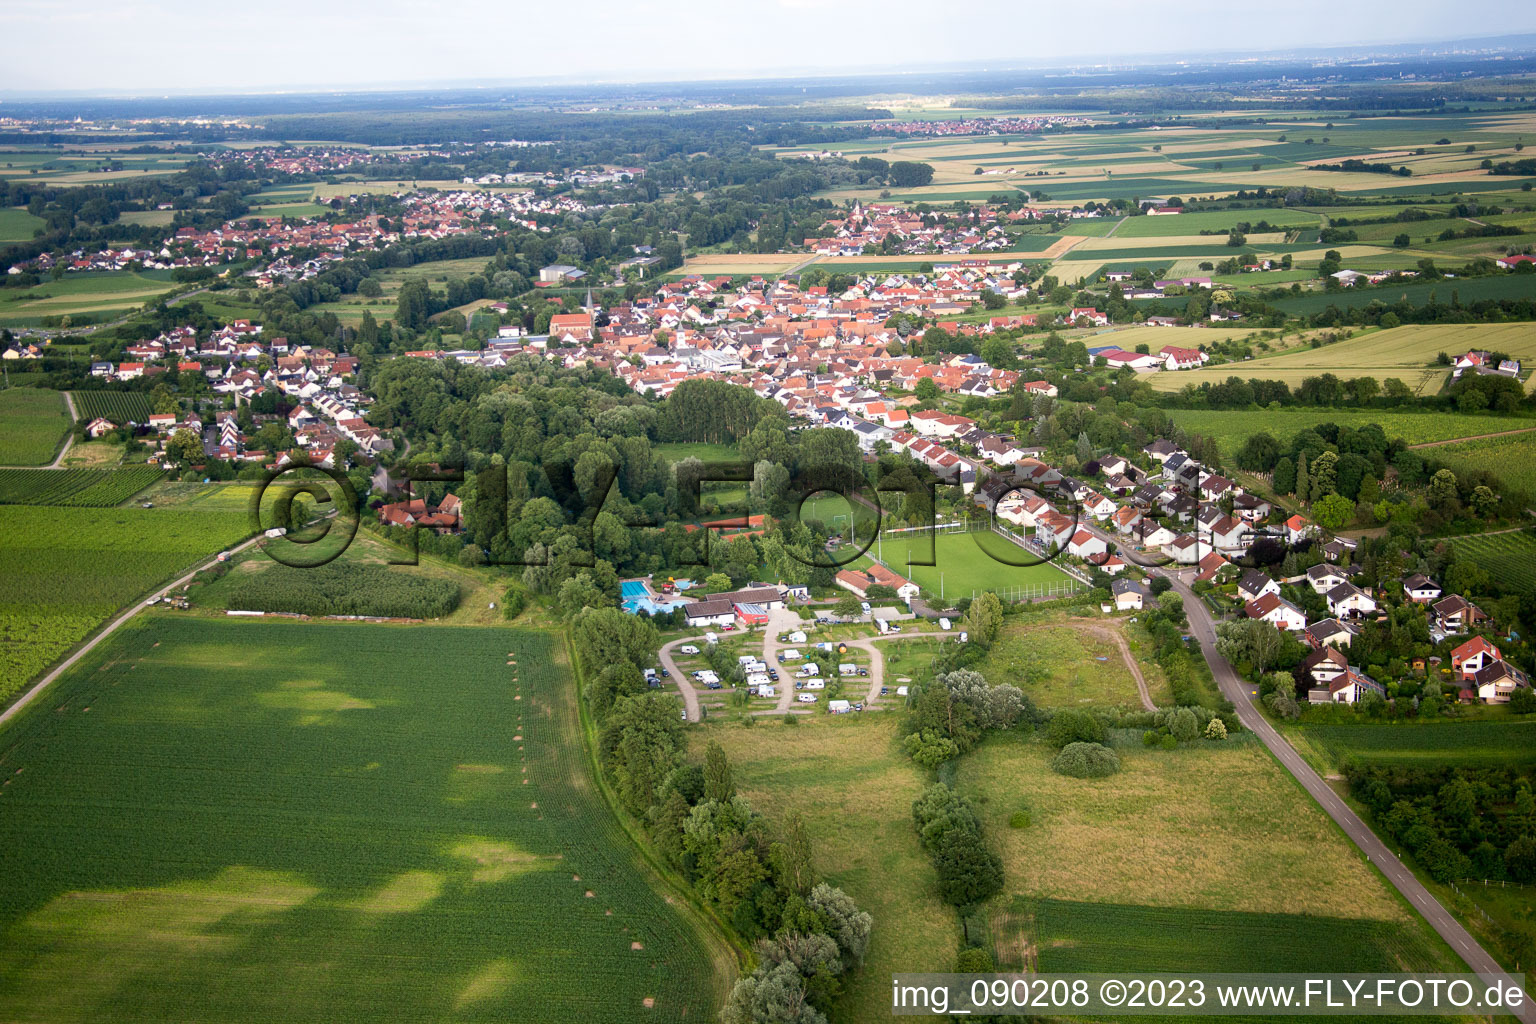 District Ingenheim in Billigheim-Ingenheim in the state Rhineland-Palatinate, Germany out of the air